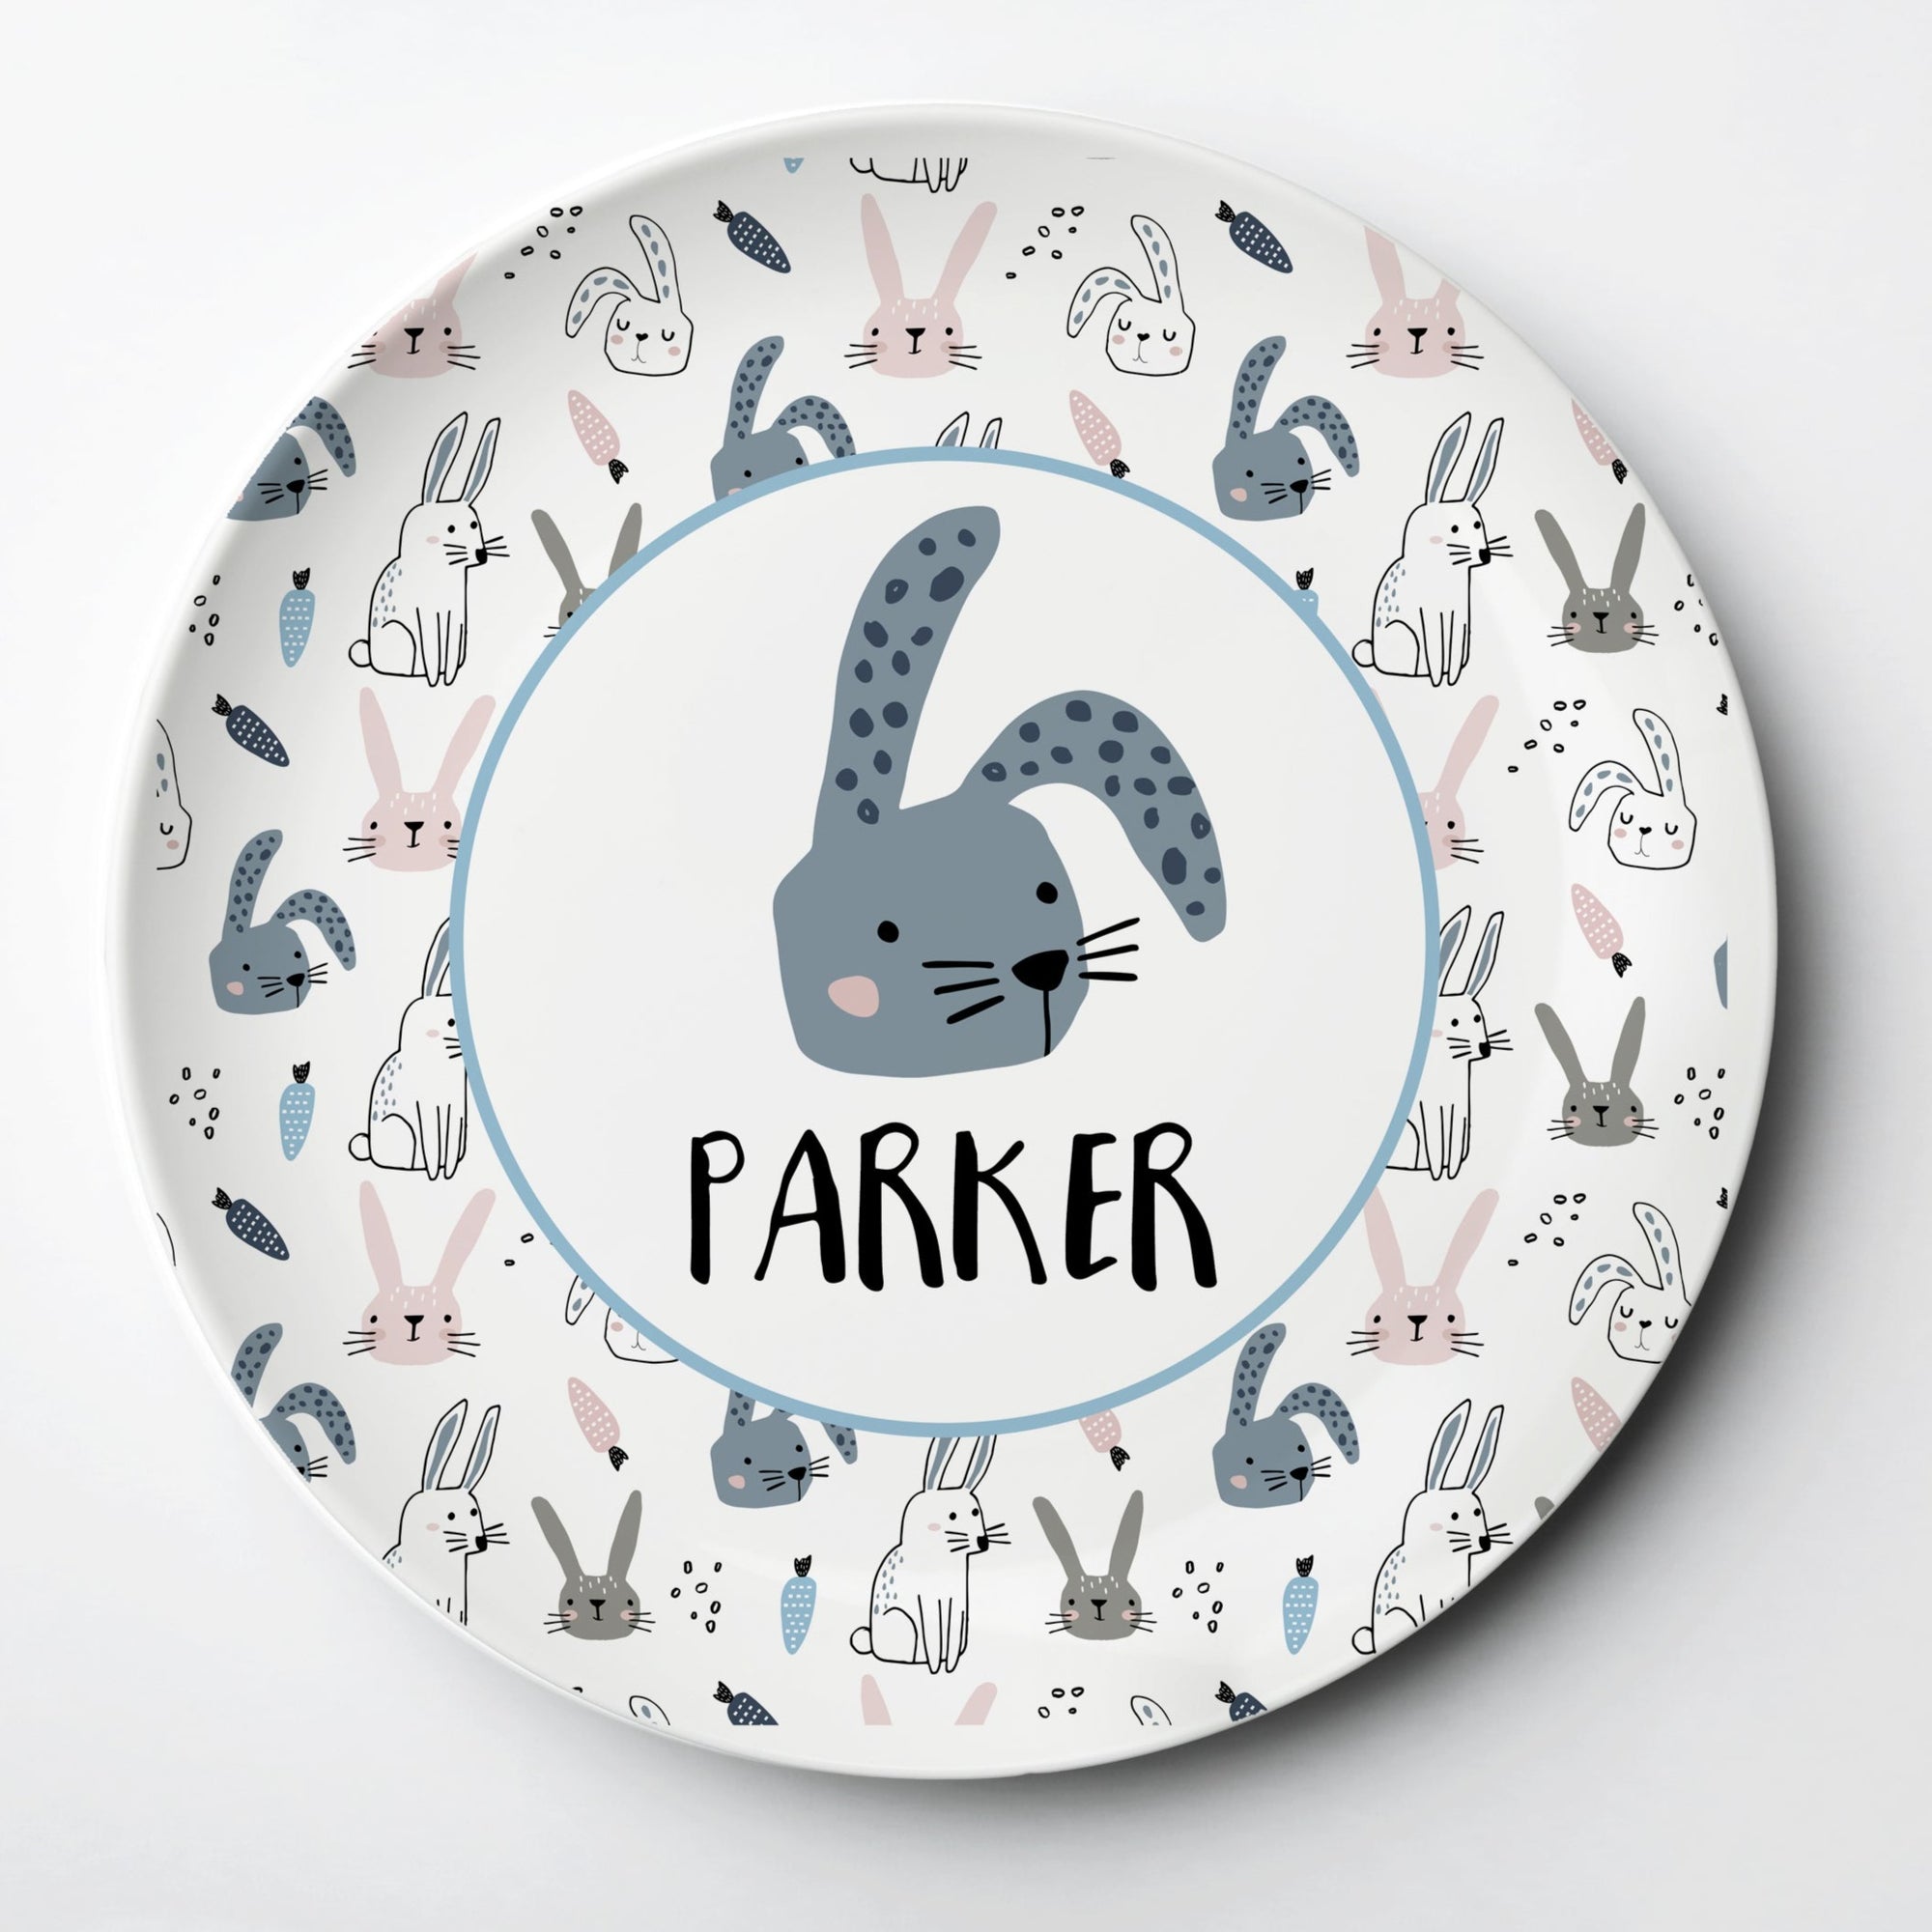 Personalized Kids Easter Plate with whimsical bunnies in blue and gray. A modern twist on the traditional Easter decor